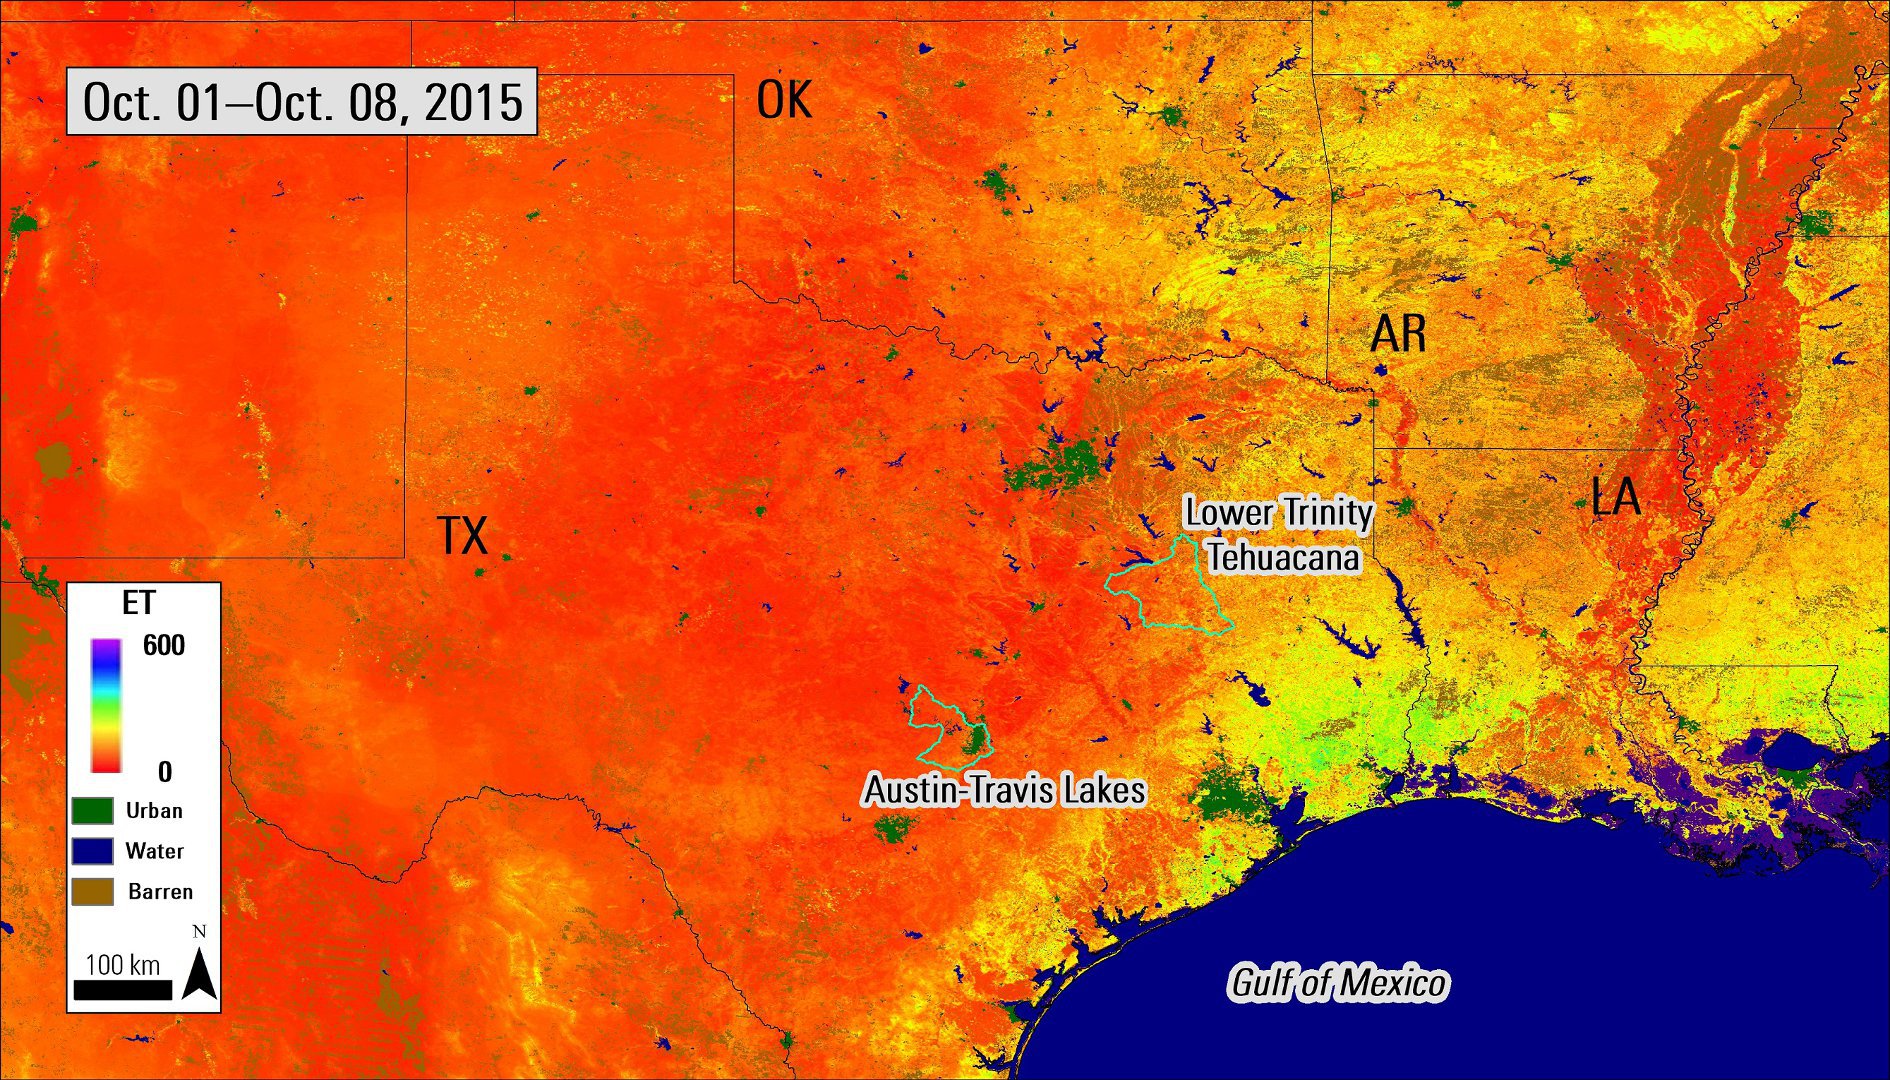 MODIS Evapotranspiration composite image over Texas from October 8, 2015.